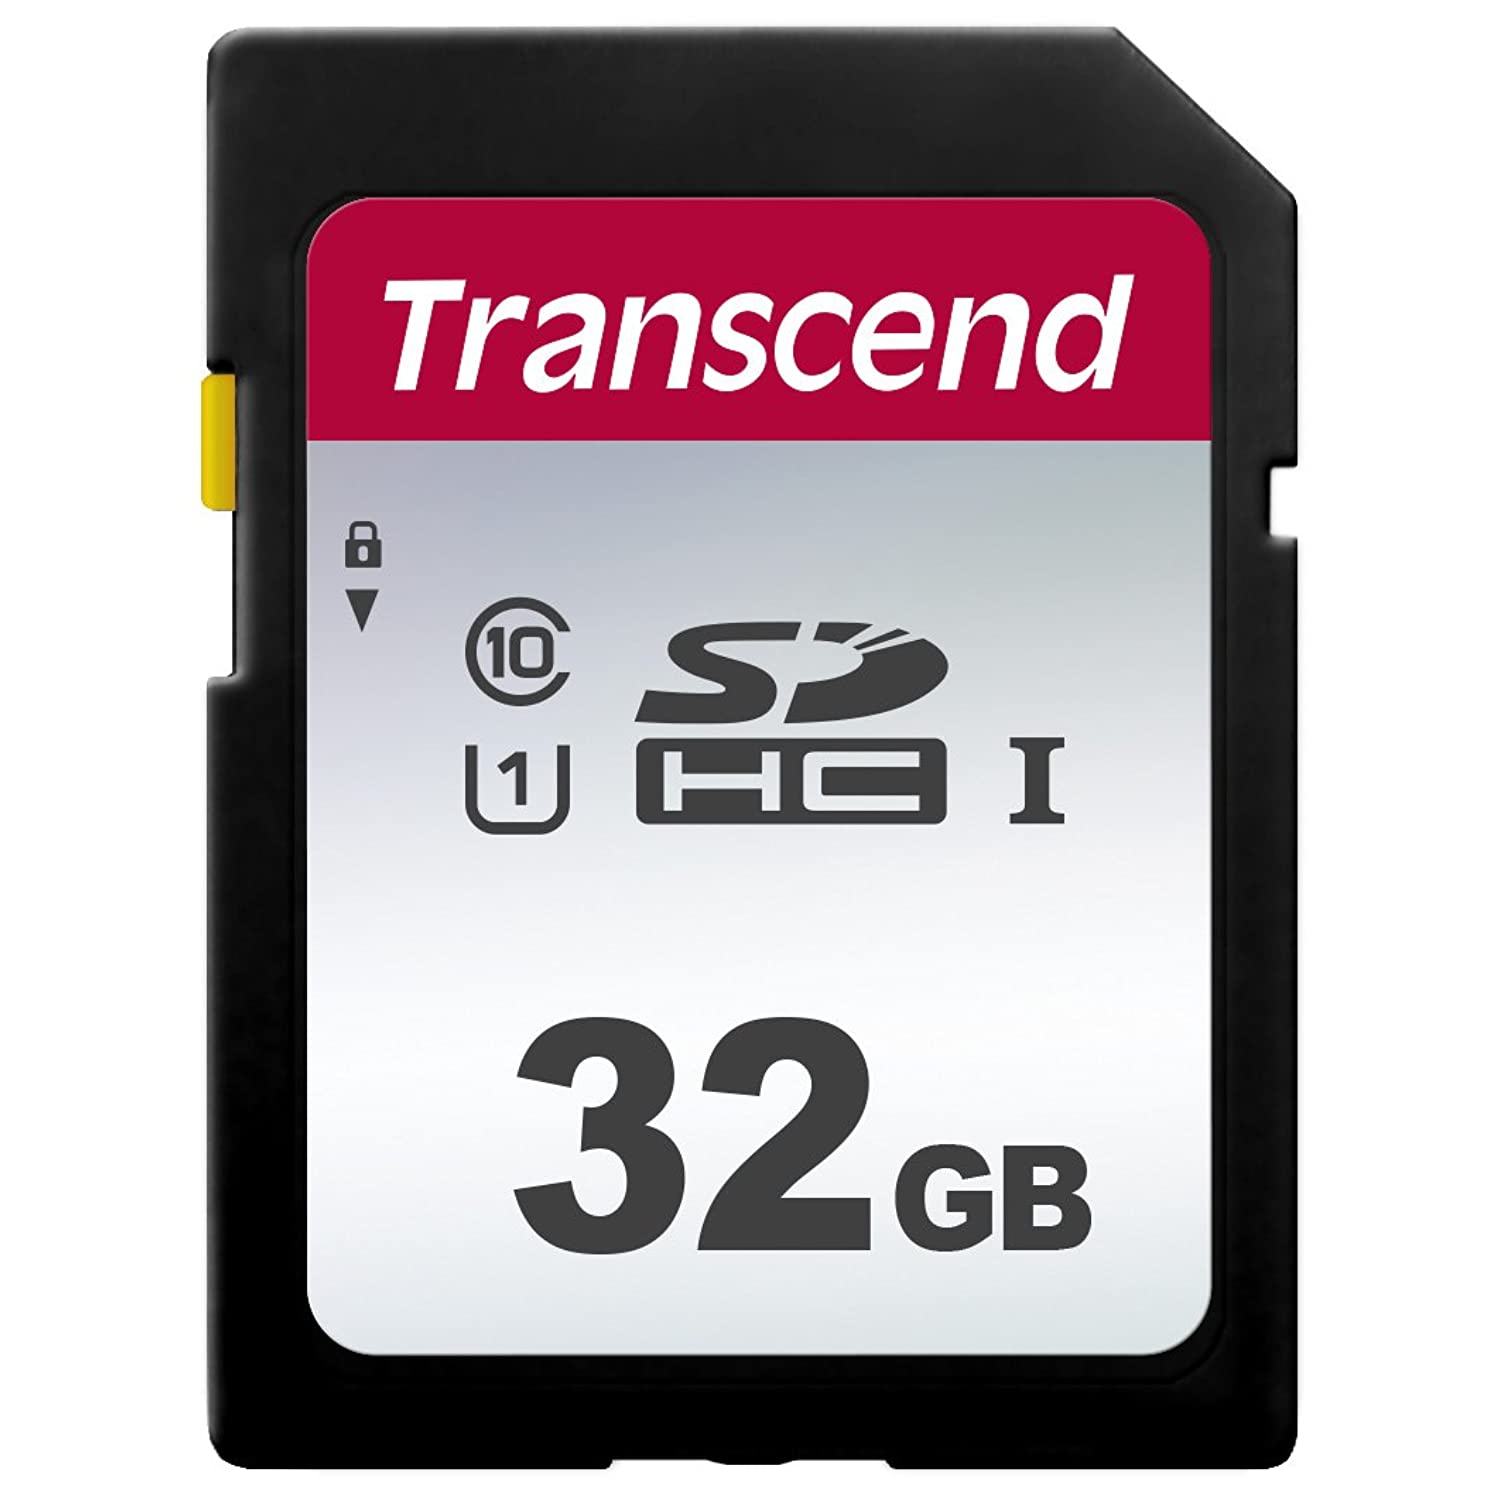 Transcend 32GB SDXC/SDHC 300S Memory Card TS32GSDC300S - image 1 of 3